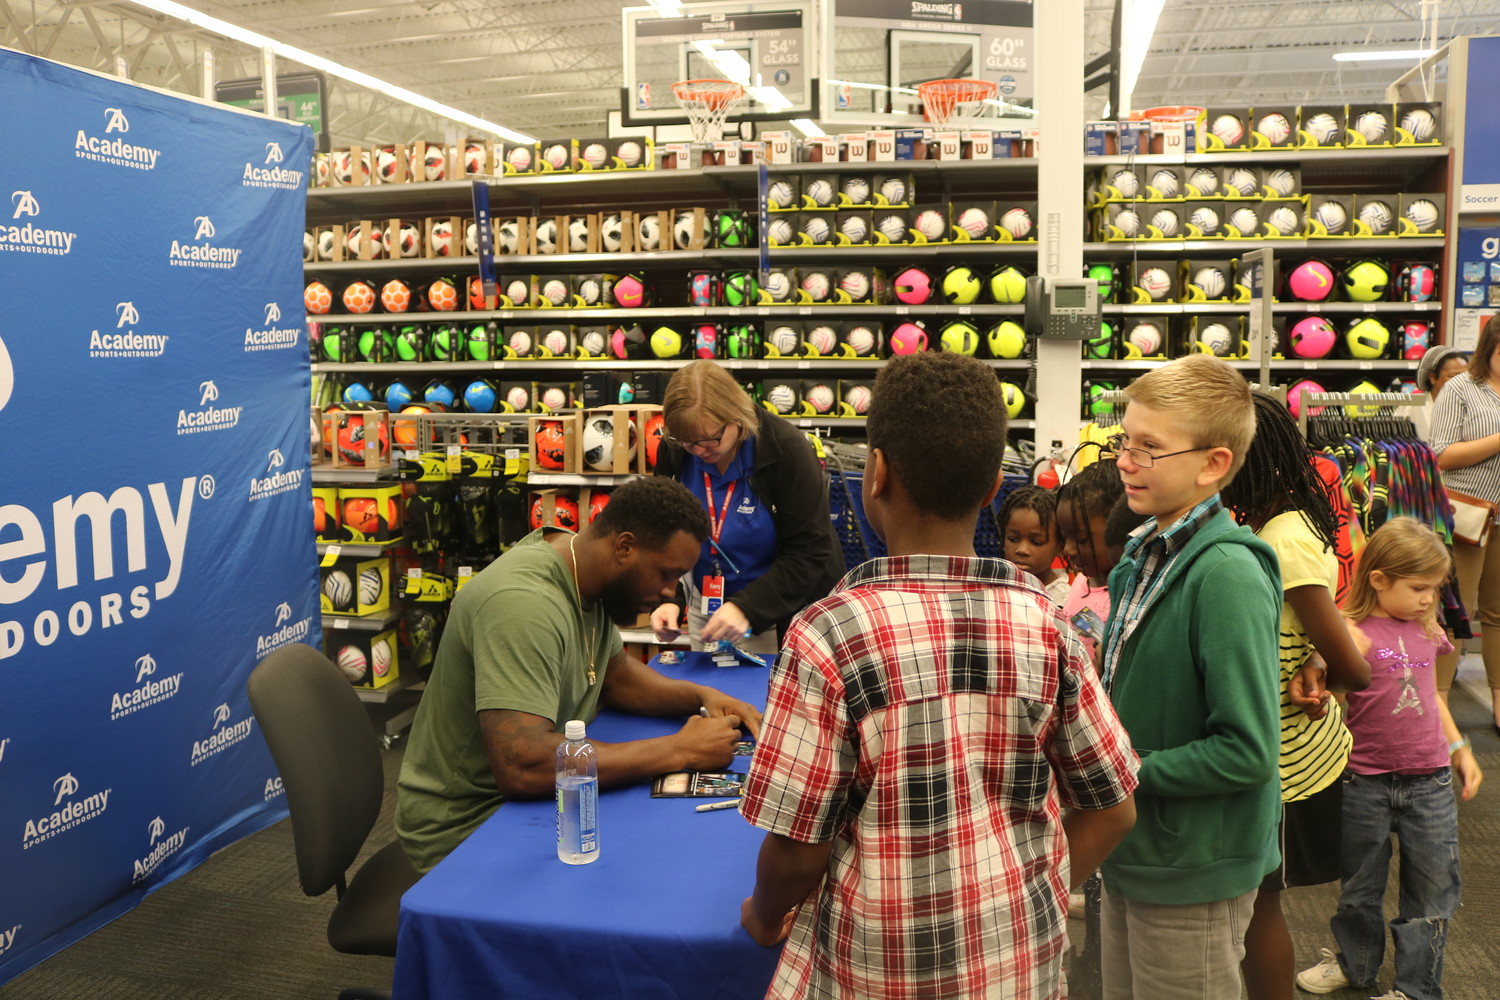 Jaguars linebacker Lerentee McCray signs autographs July 23 at a back-to-school event at Academy Sports + Outdoors for children from the Sulzbacker Village, a community for homeless women and children.